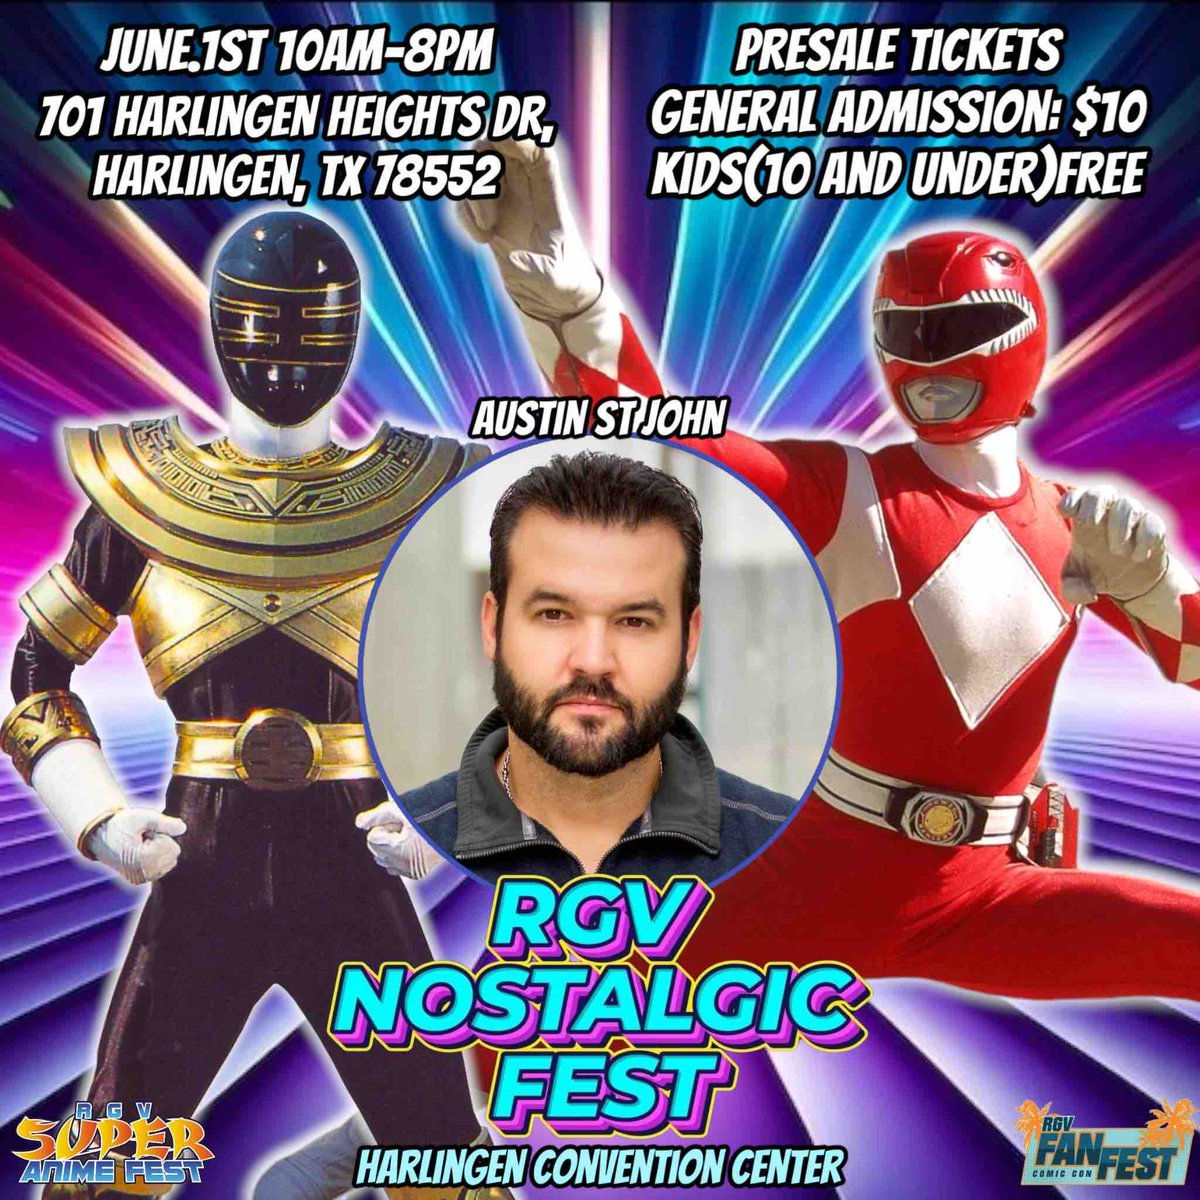 I’m teleporting into RGV Nostalgic Fest next weekend, June 1st, 10am-8pm in Harlingen, TX! I’ll be there all day to answer questions, sign autographs and take pictures with you! austinstjohn.komi.io #powerrangers #mmpr #redempt1on #rangertoreaper